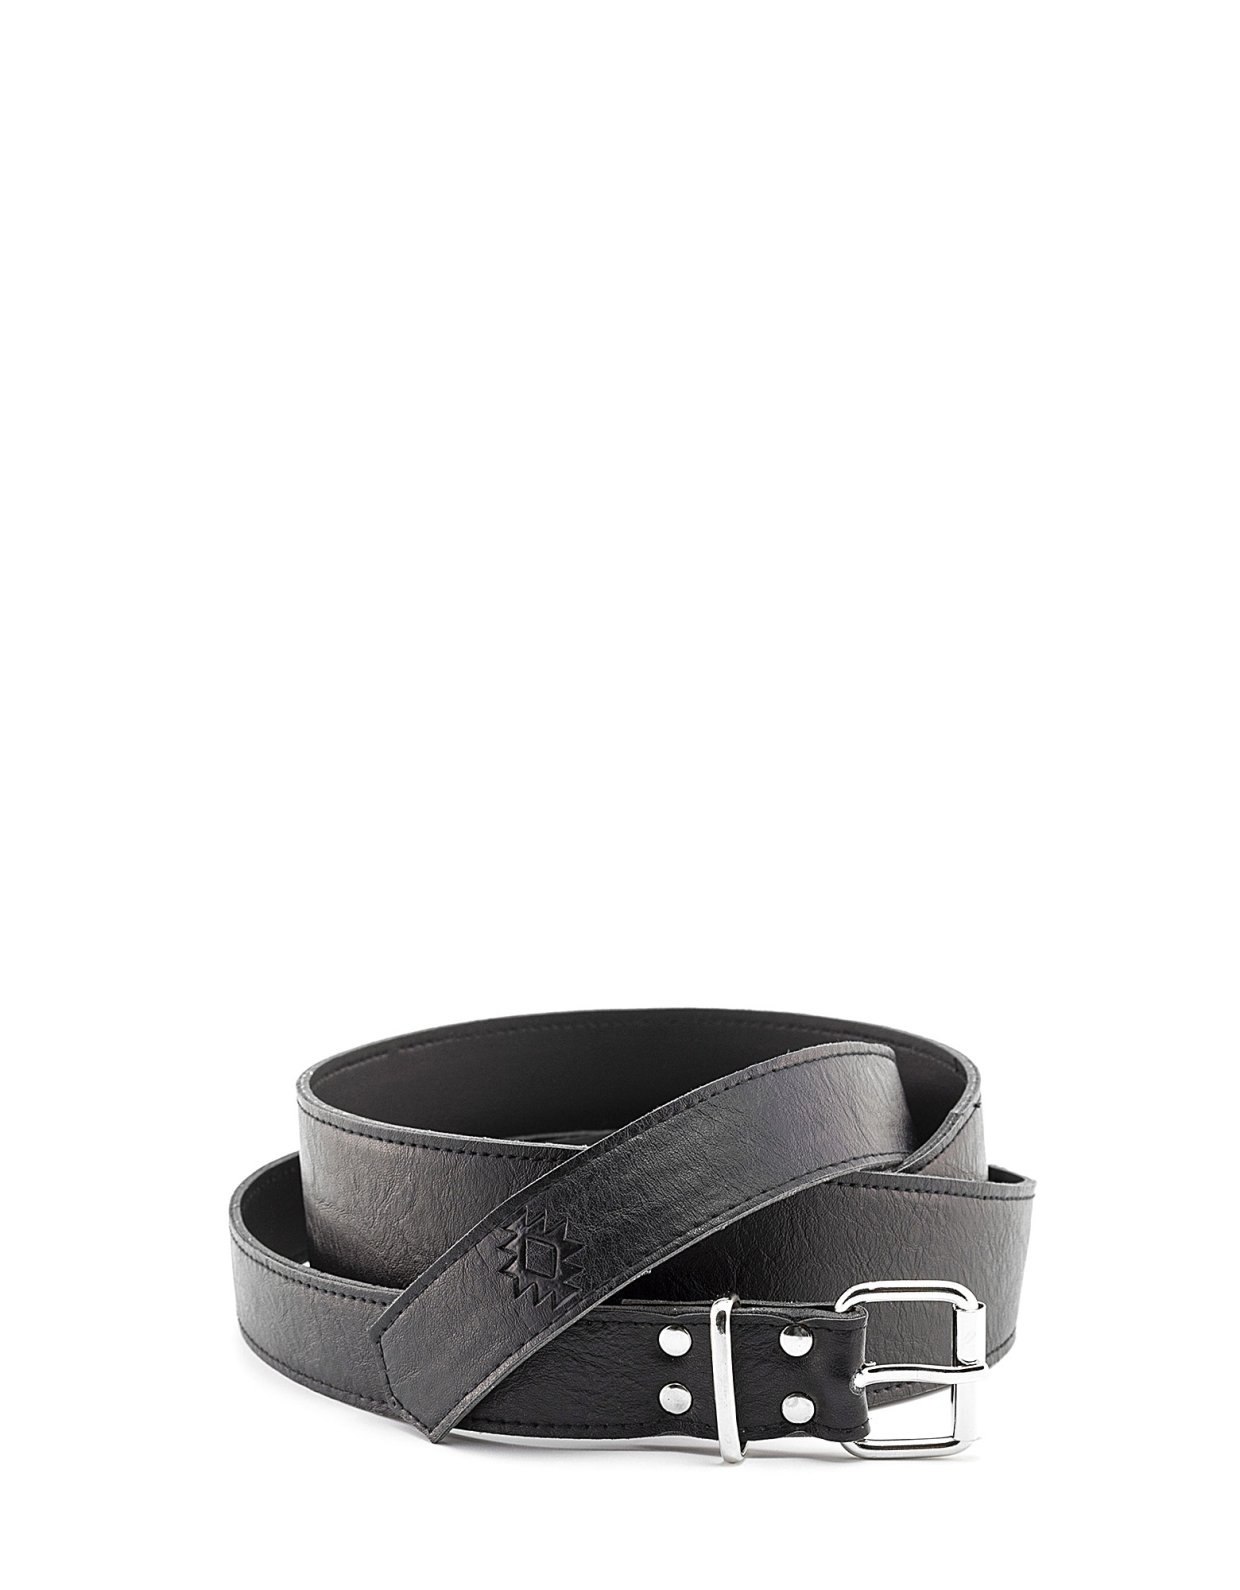 Peace & Chaos Rica eco leather belt black